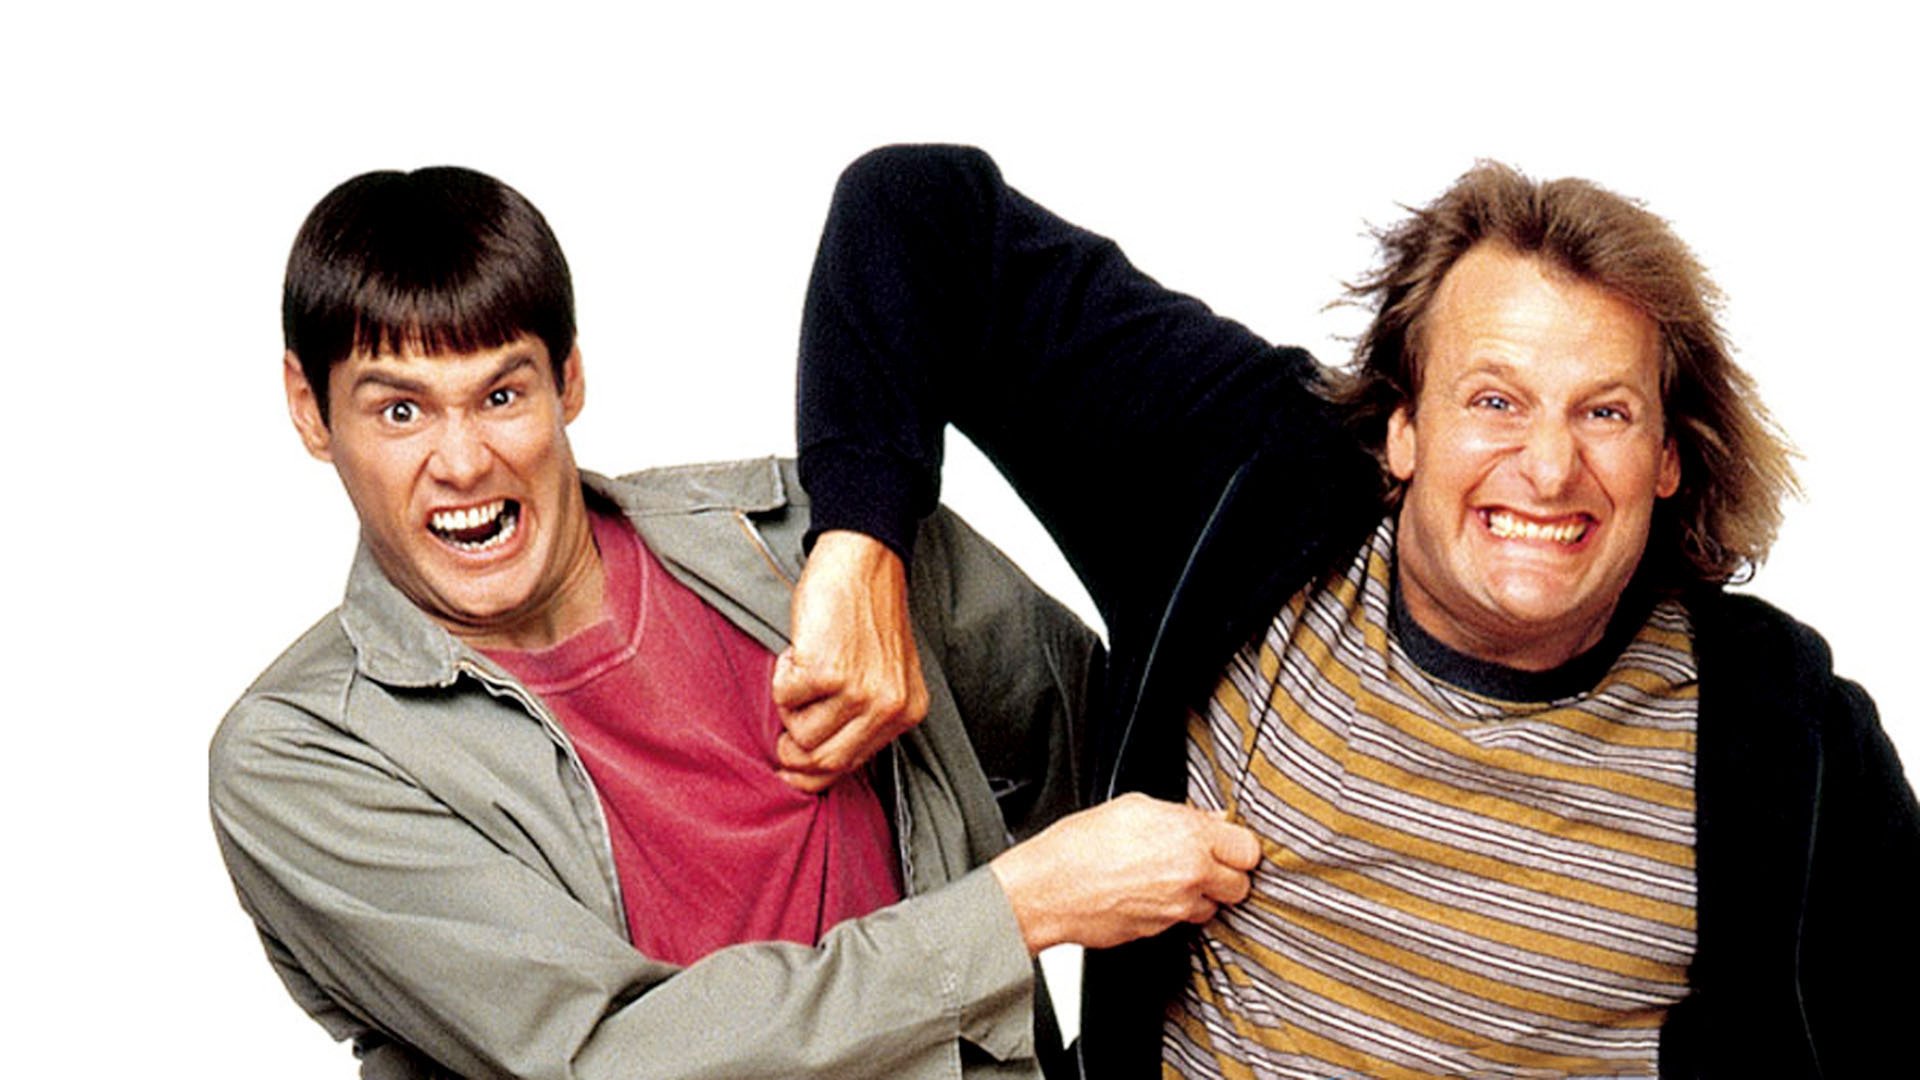 Dumb and dumber to 2014 movie pictures